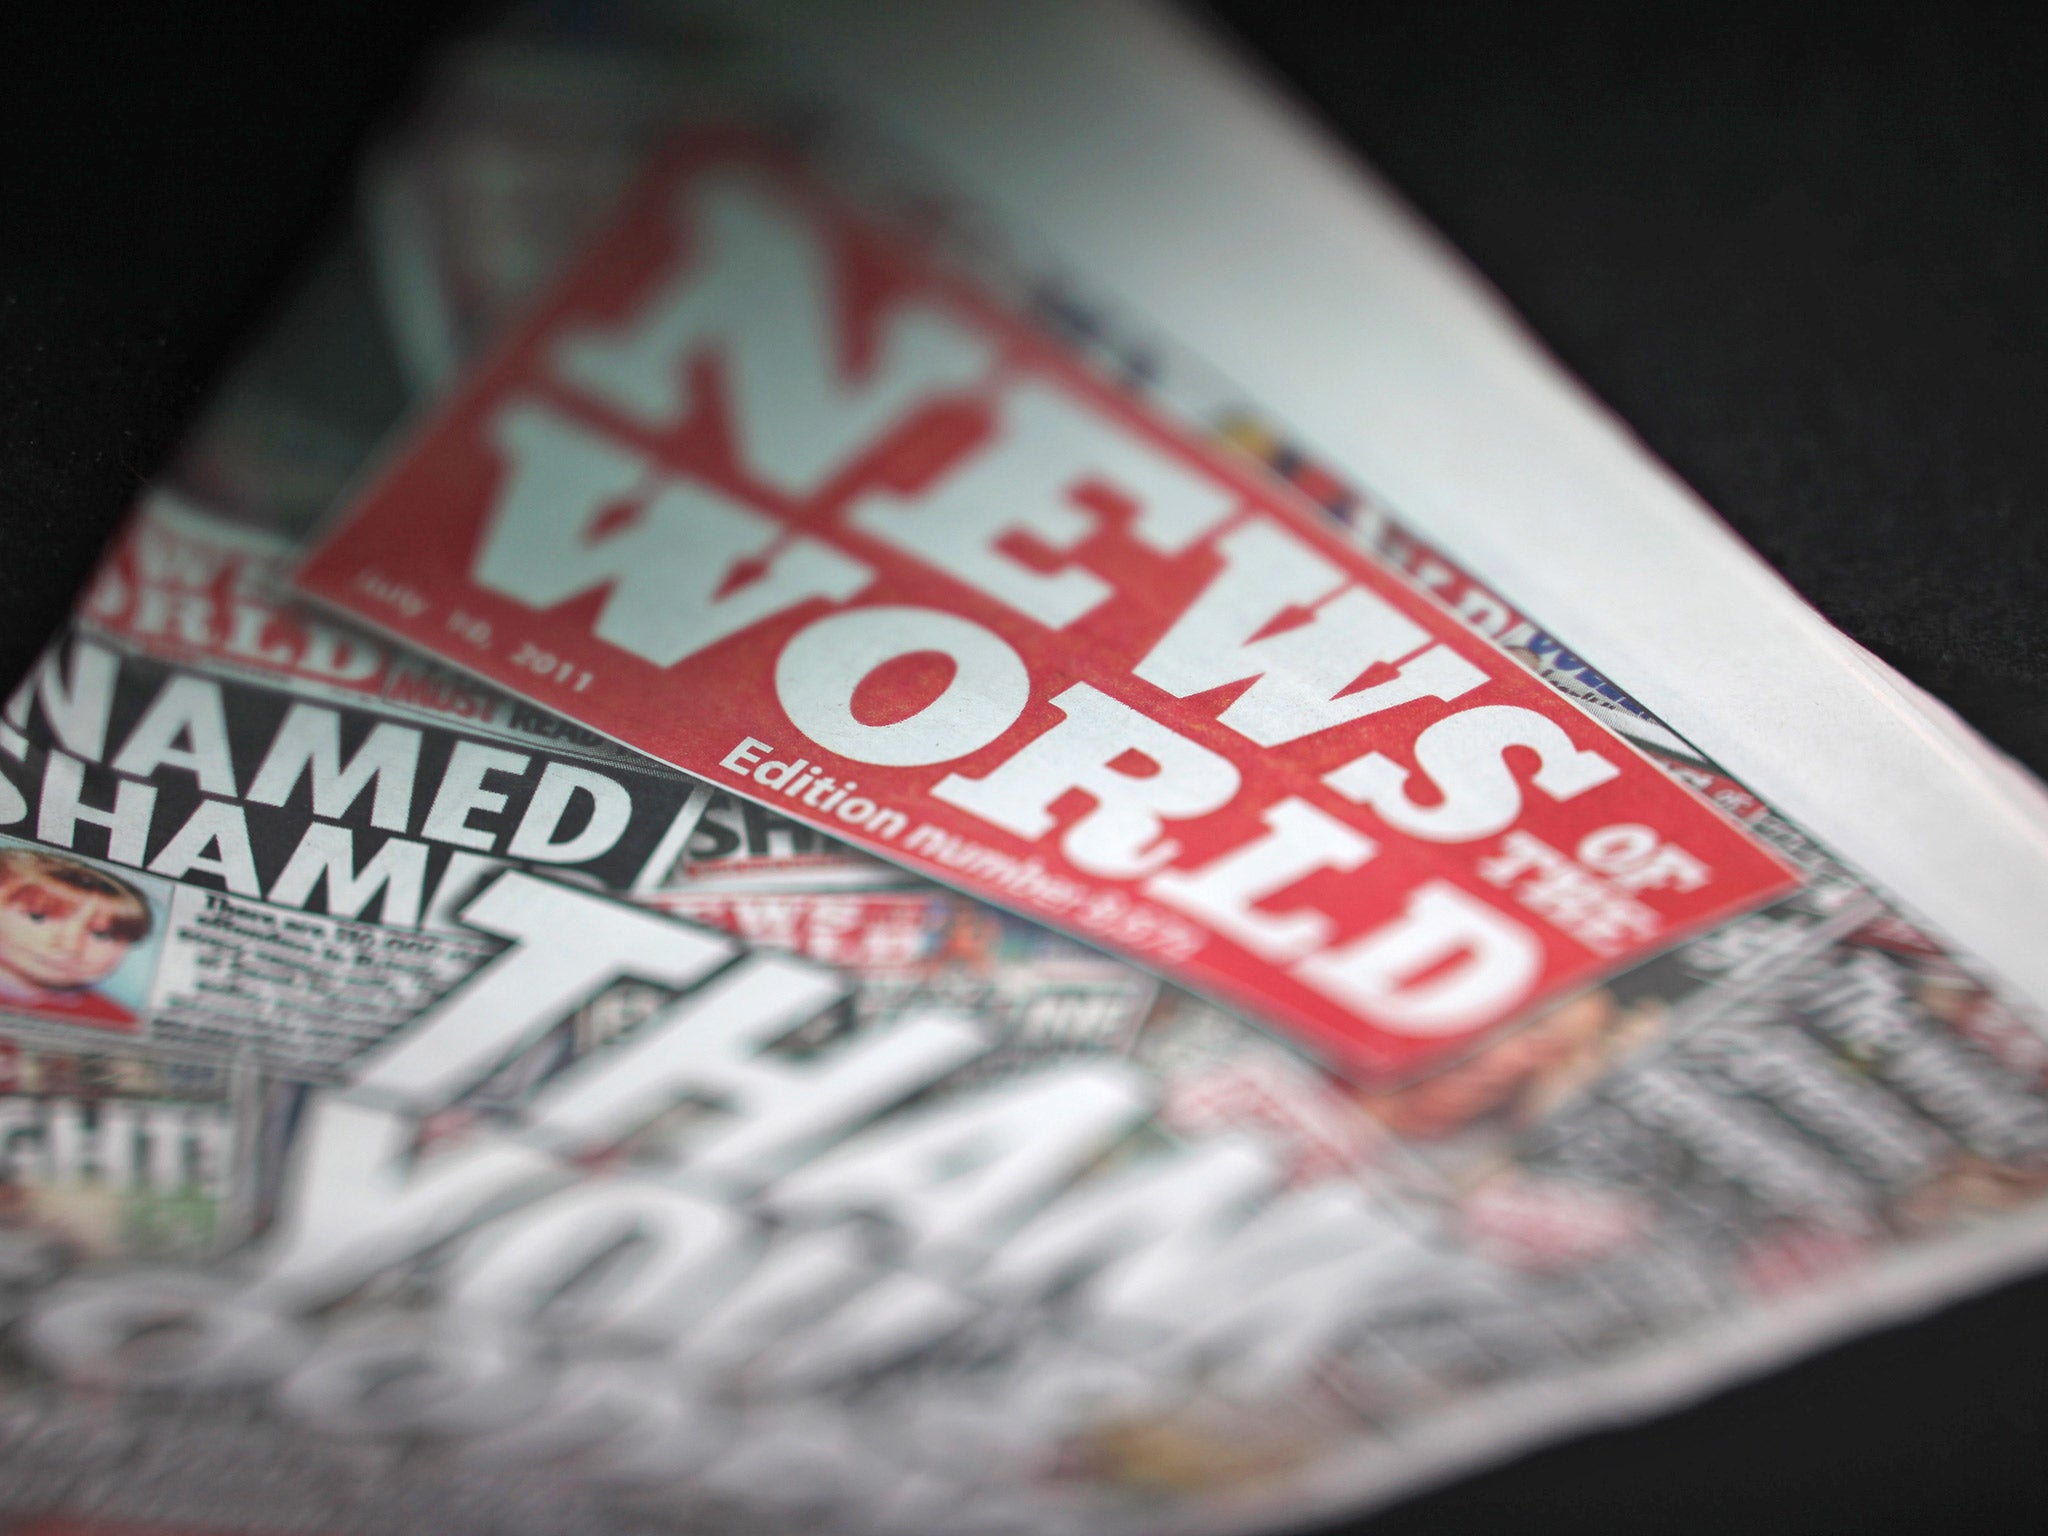 The final edition of the News of the World newspaper